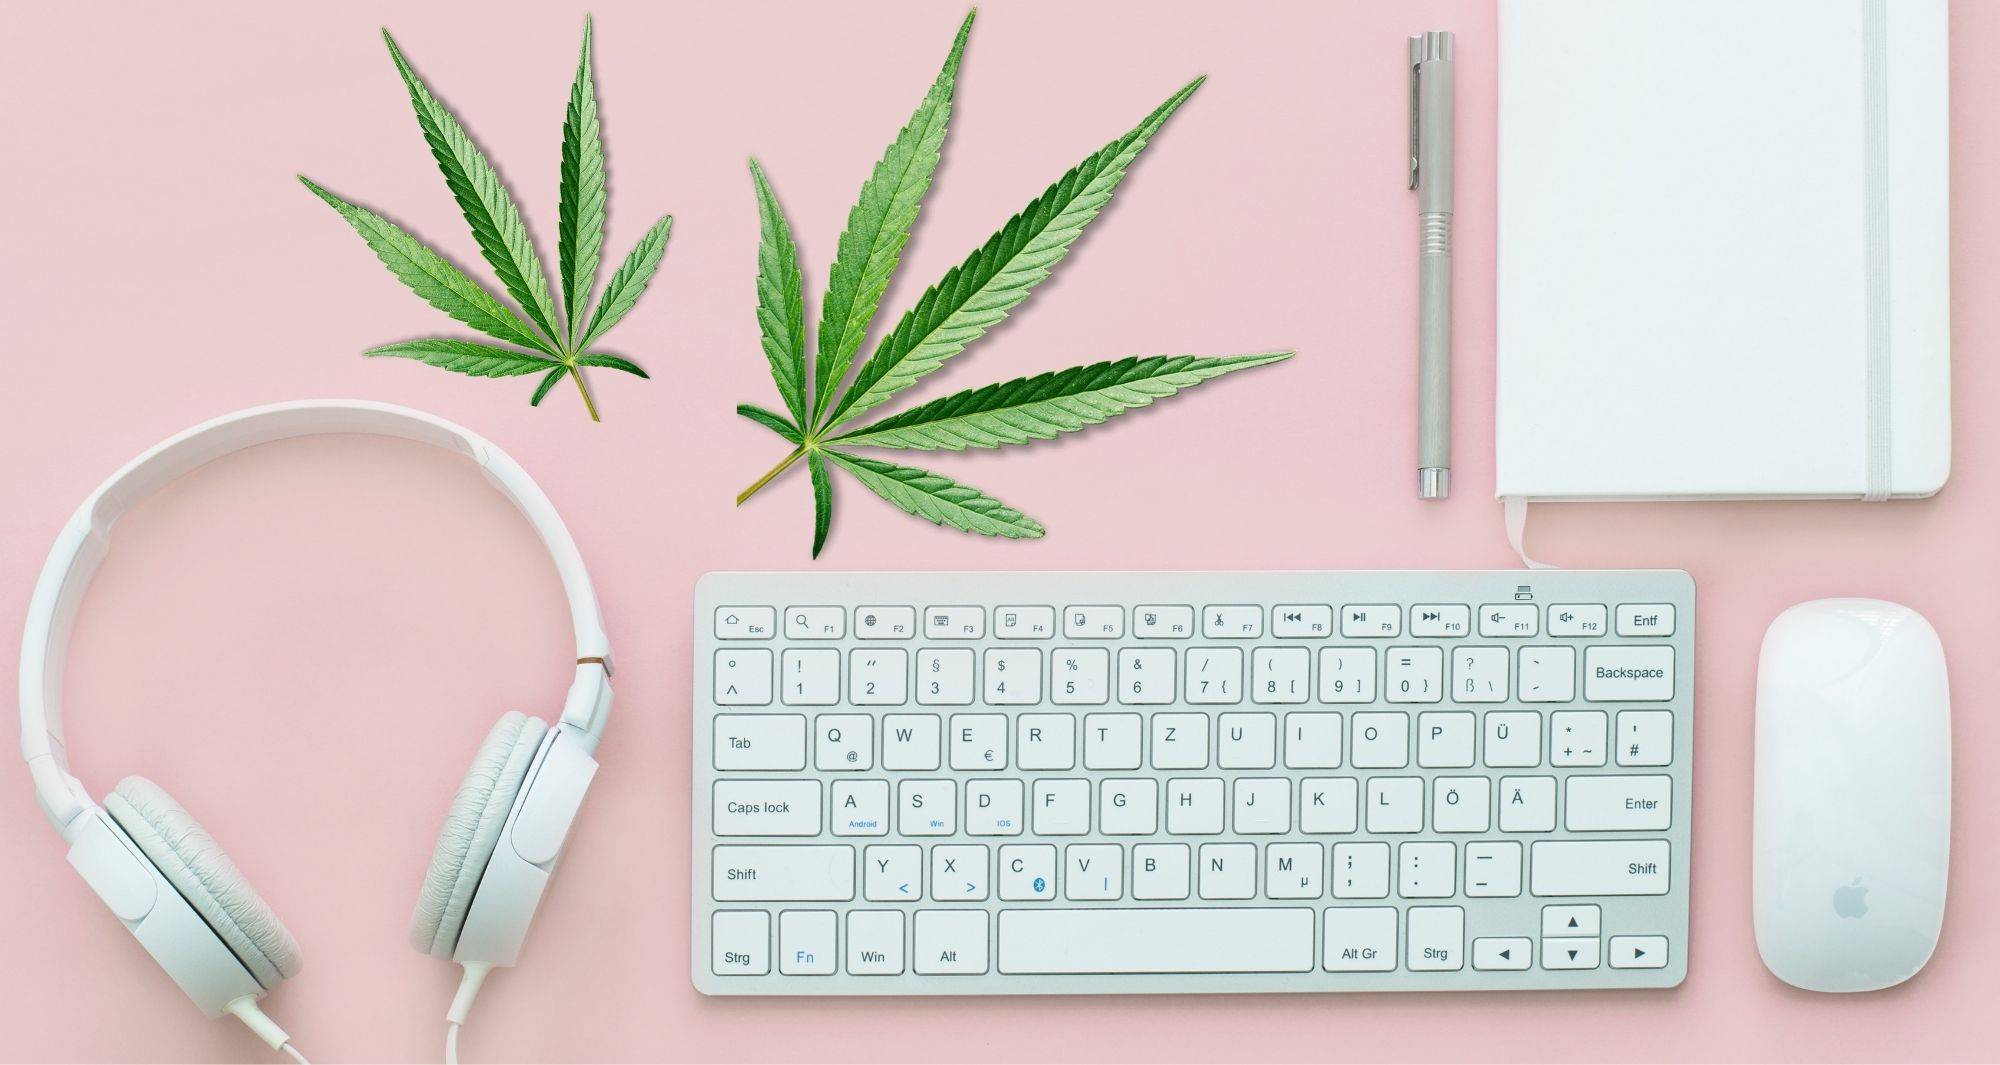 Two hemp leaves, headphones, a keyboard, mouse, pen, and a notebook laid out against a pink background.